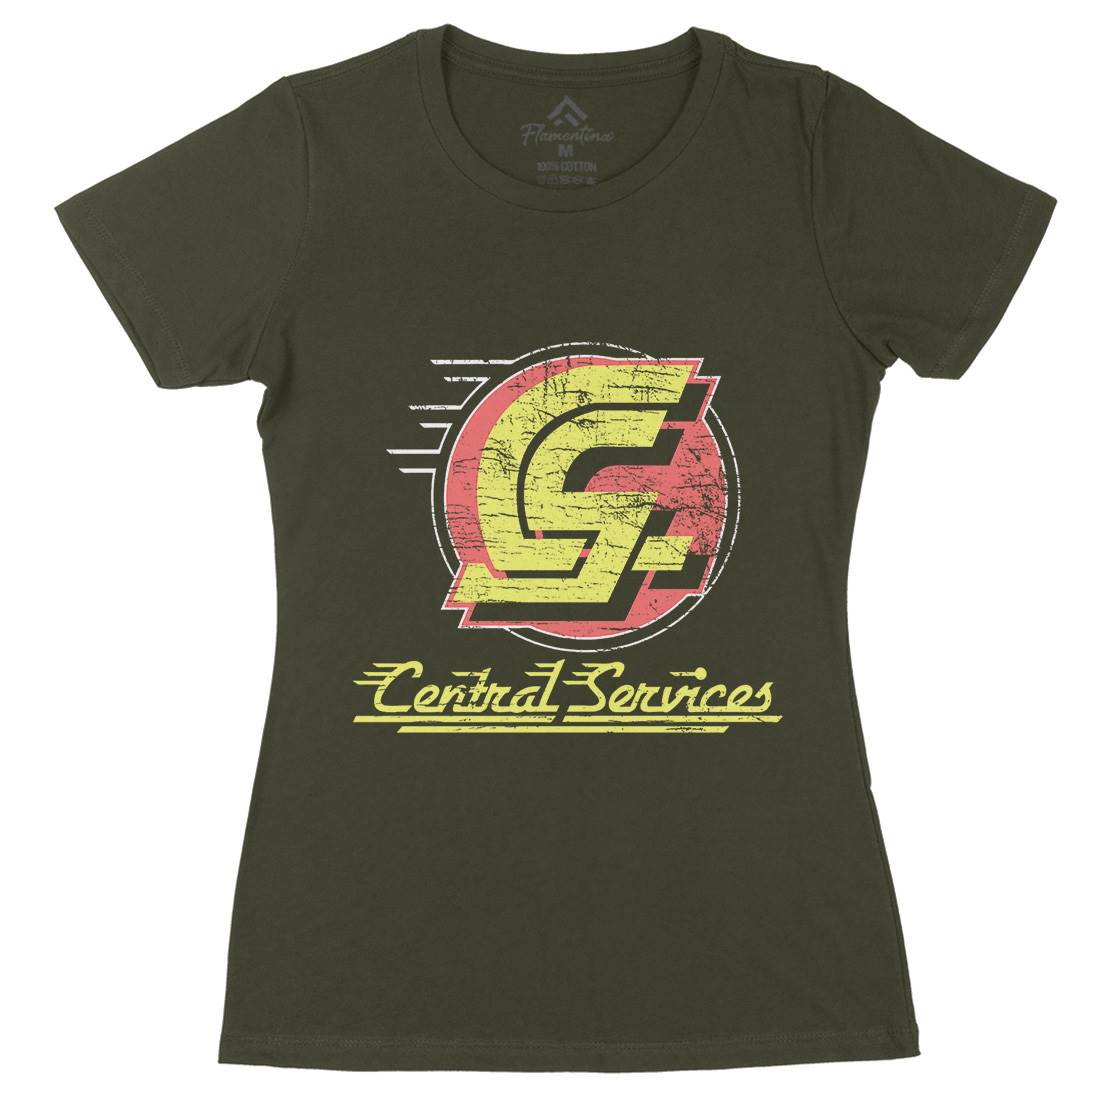 Central Services Womens Organic Crew Neck T-Shirt Space D250